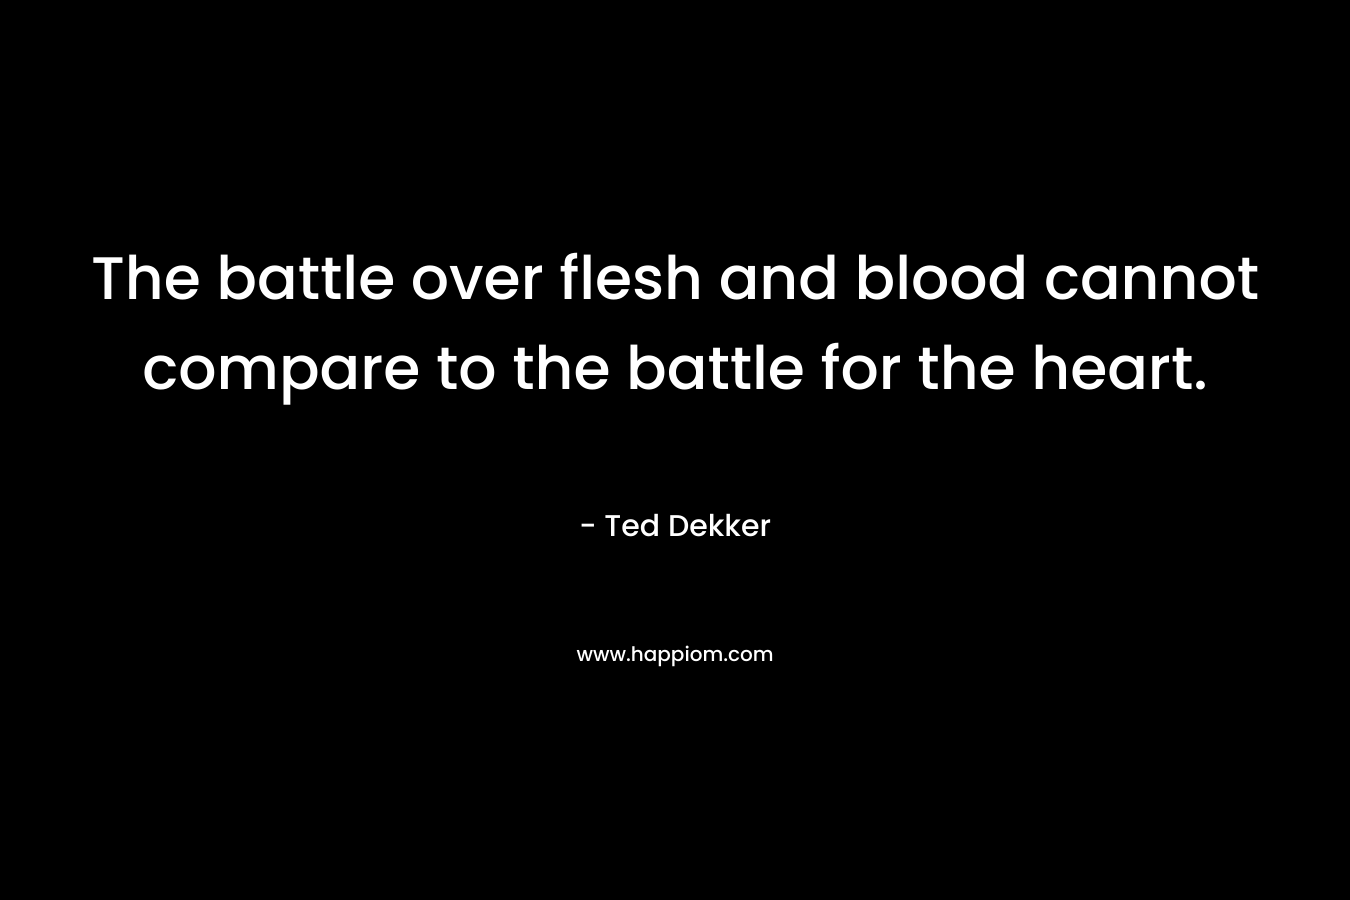 The battle over flesh and blood cannot compare to the battle for the heart.